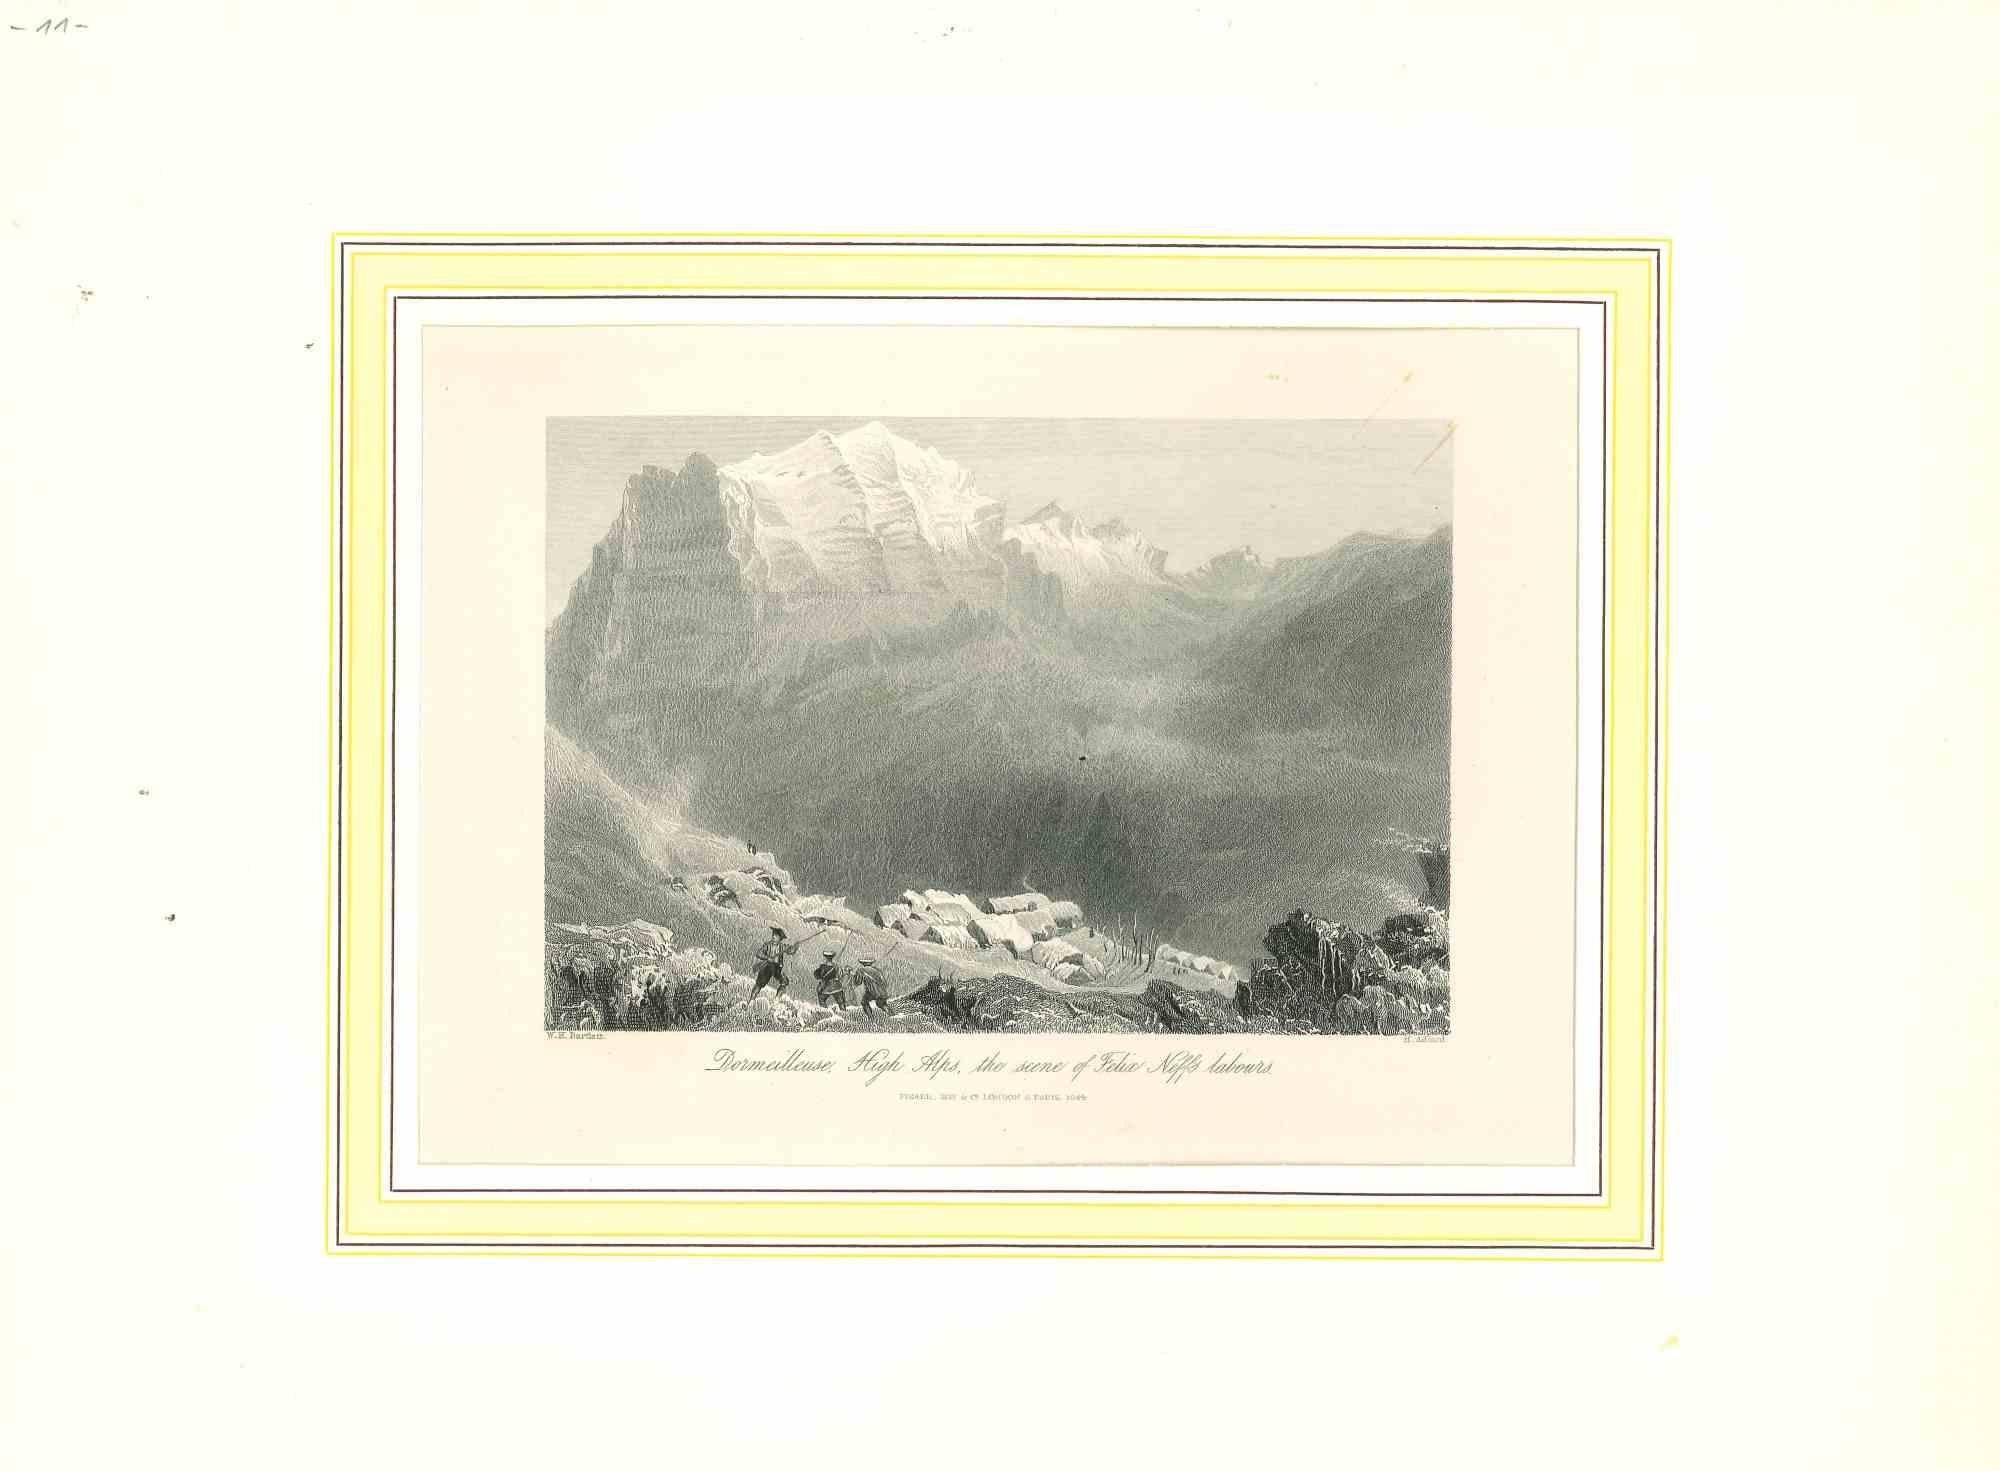 Unknown Figurative Print - Les Alpes - Original Lithograph - Early 19th Century